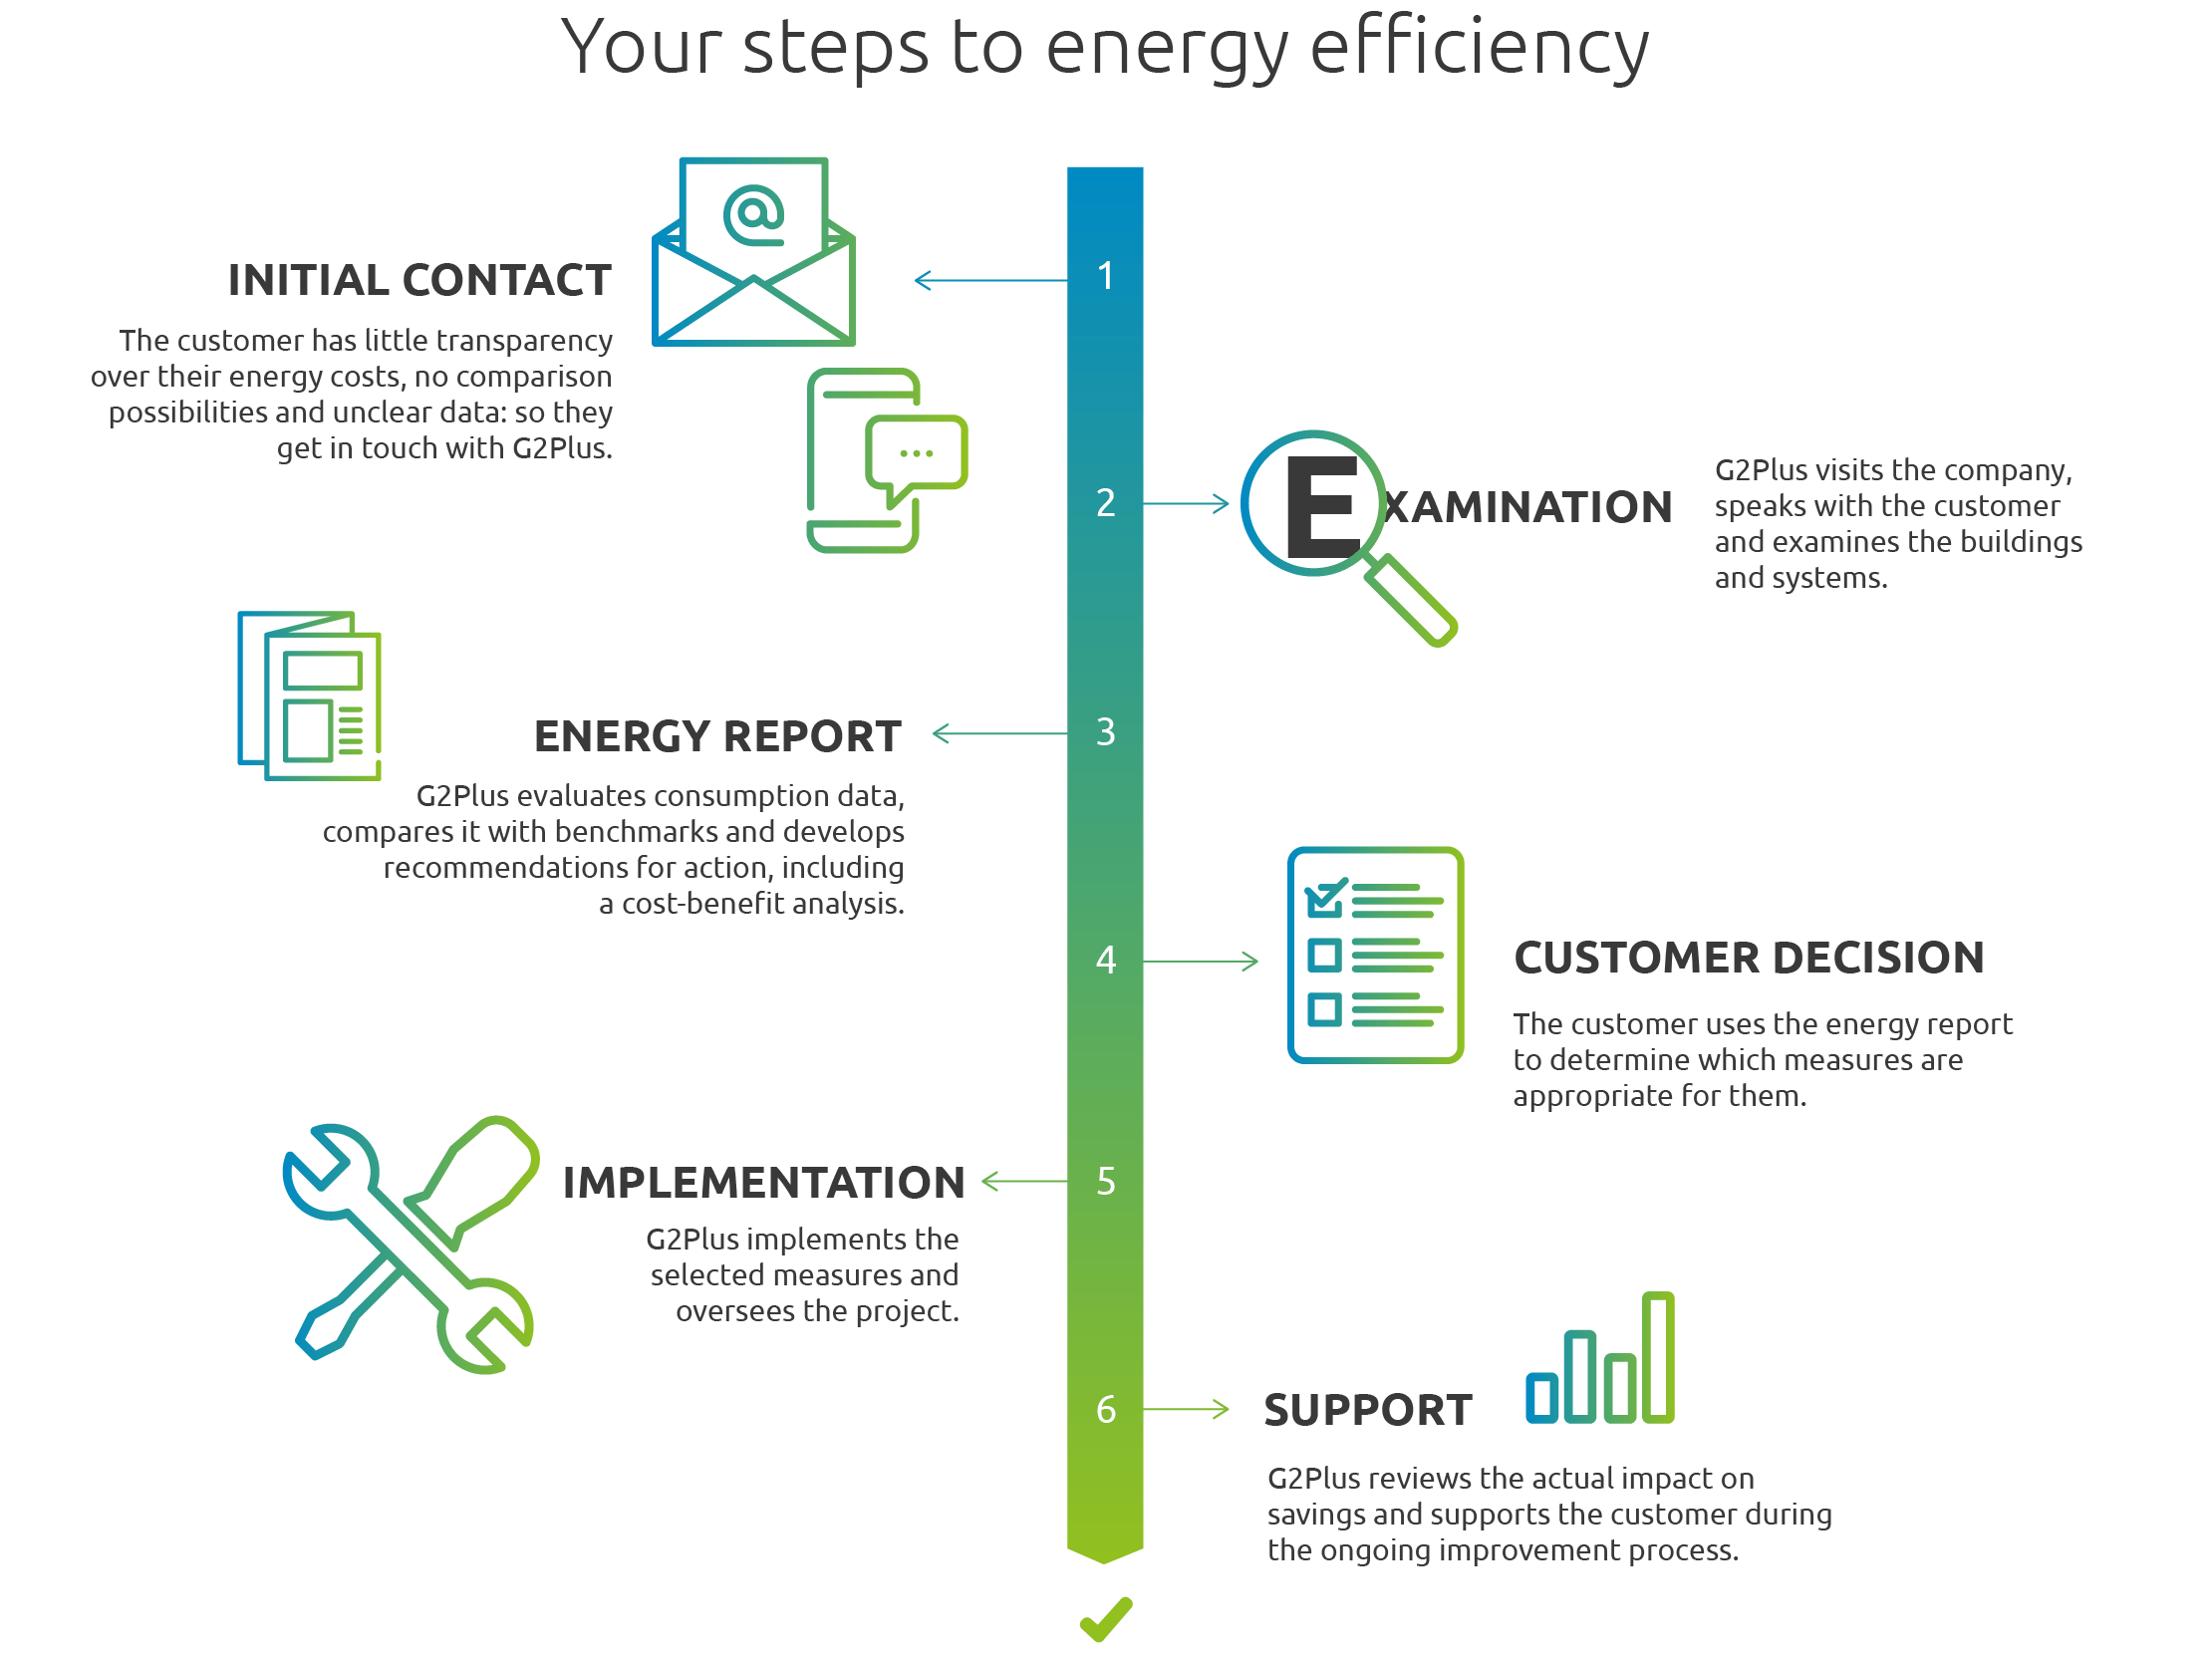 Our way to your energy efficiency